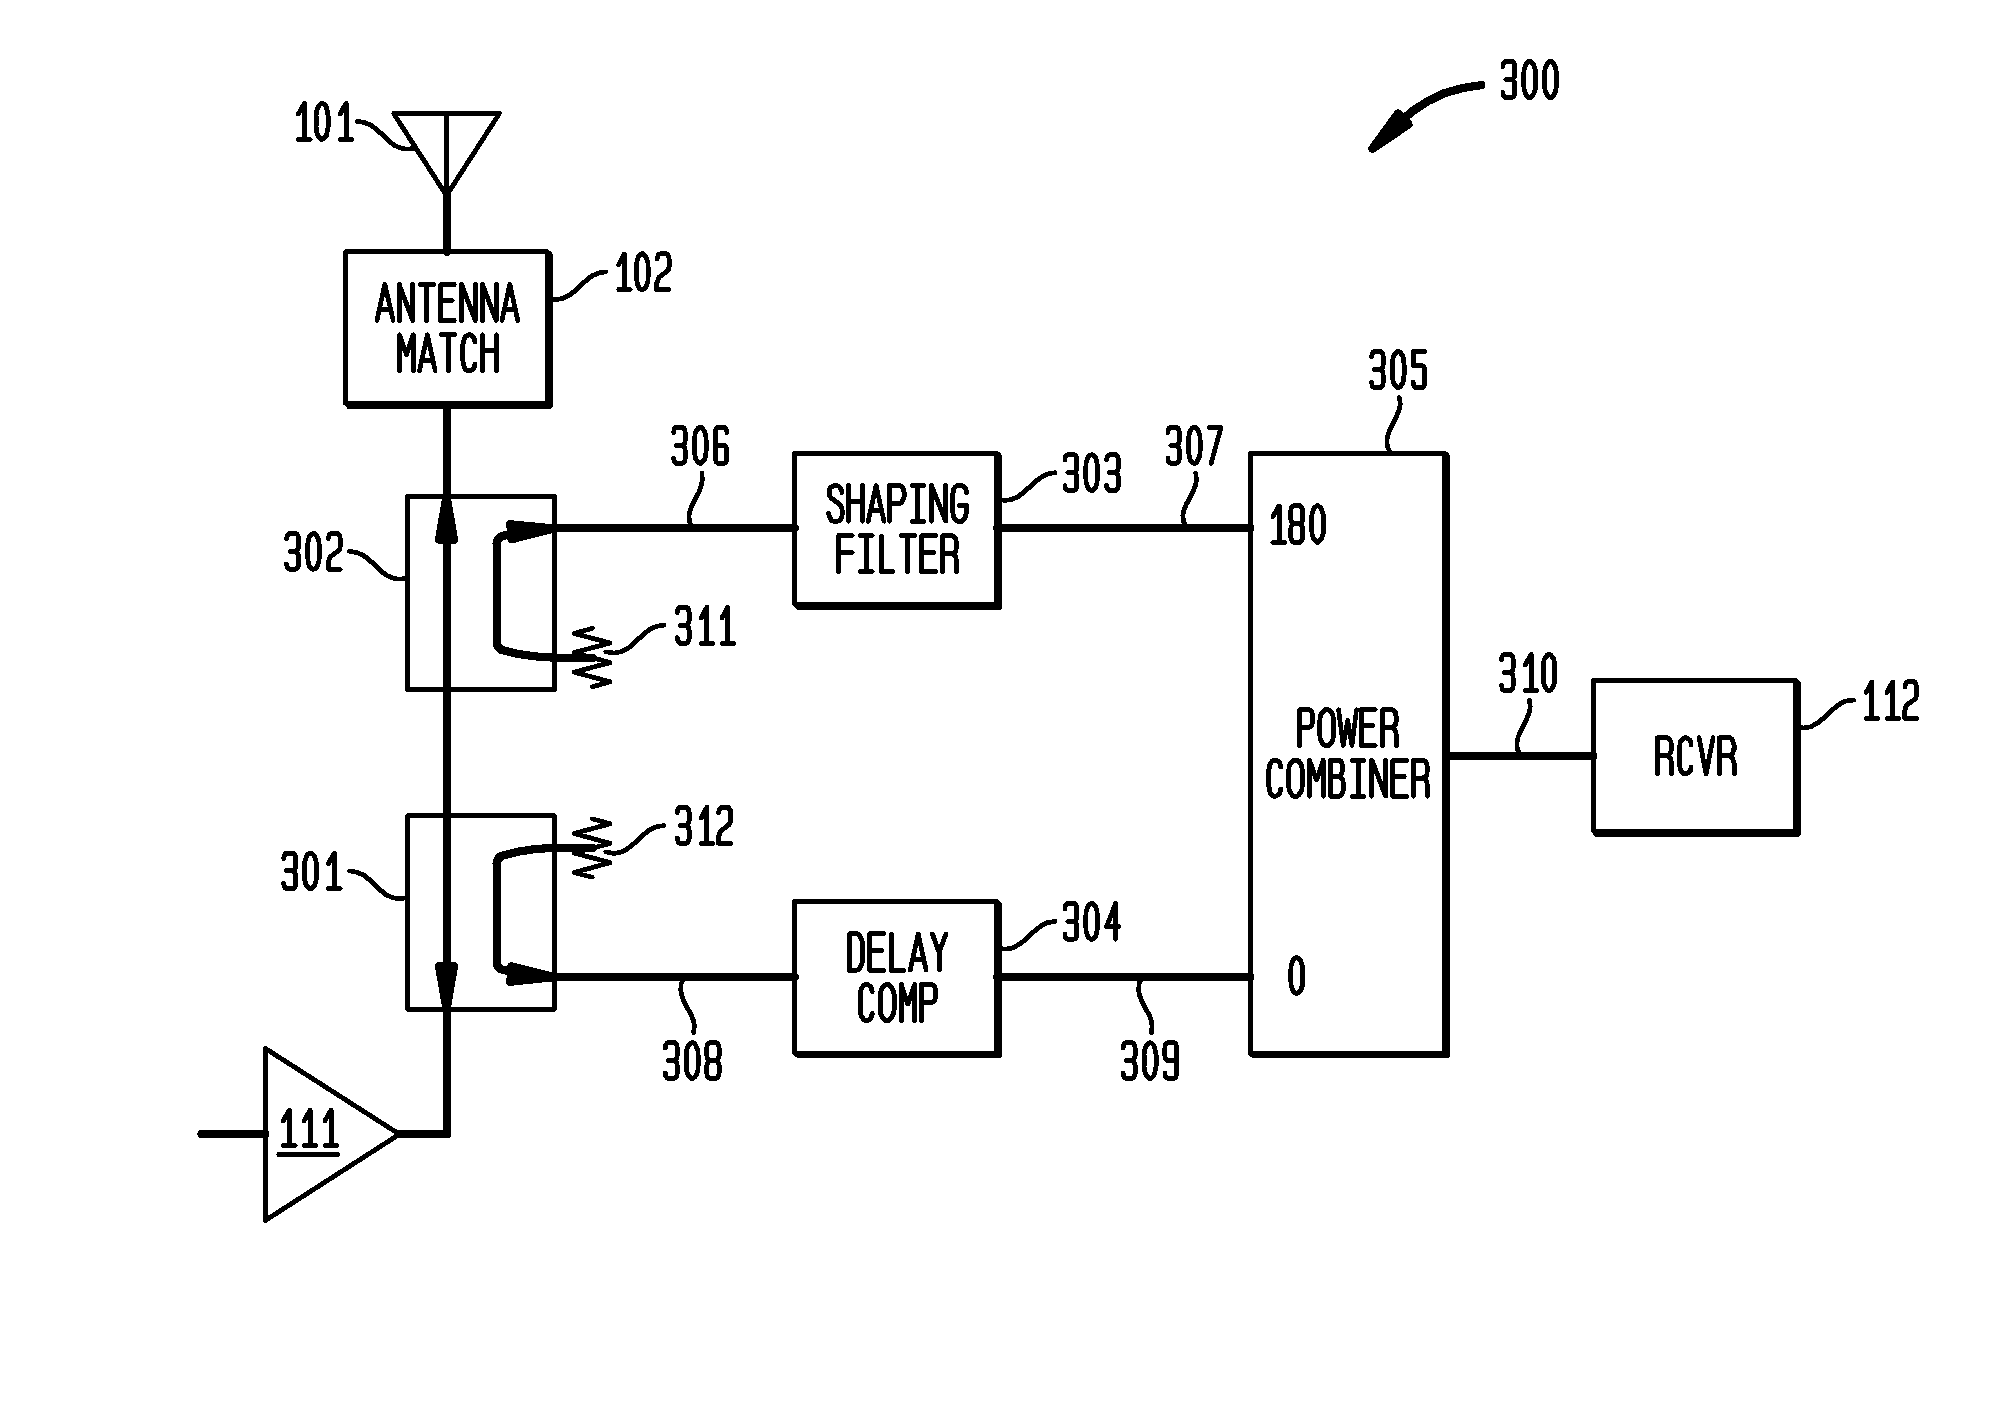 Directional notch filter for simultaneous transmit and receive of wideband signals